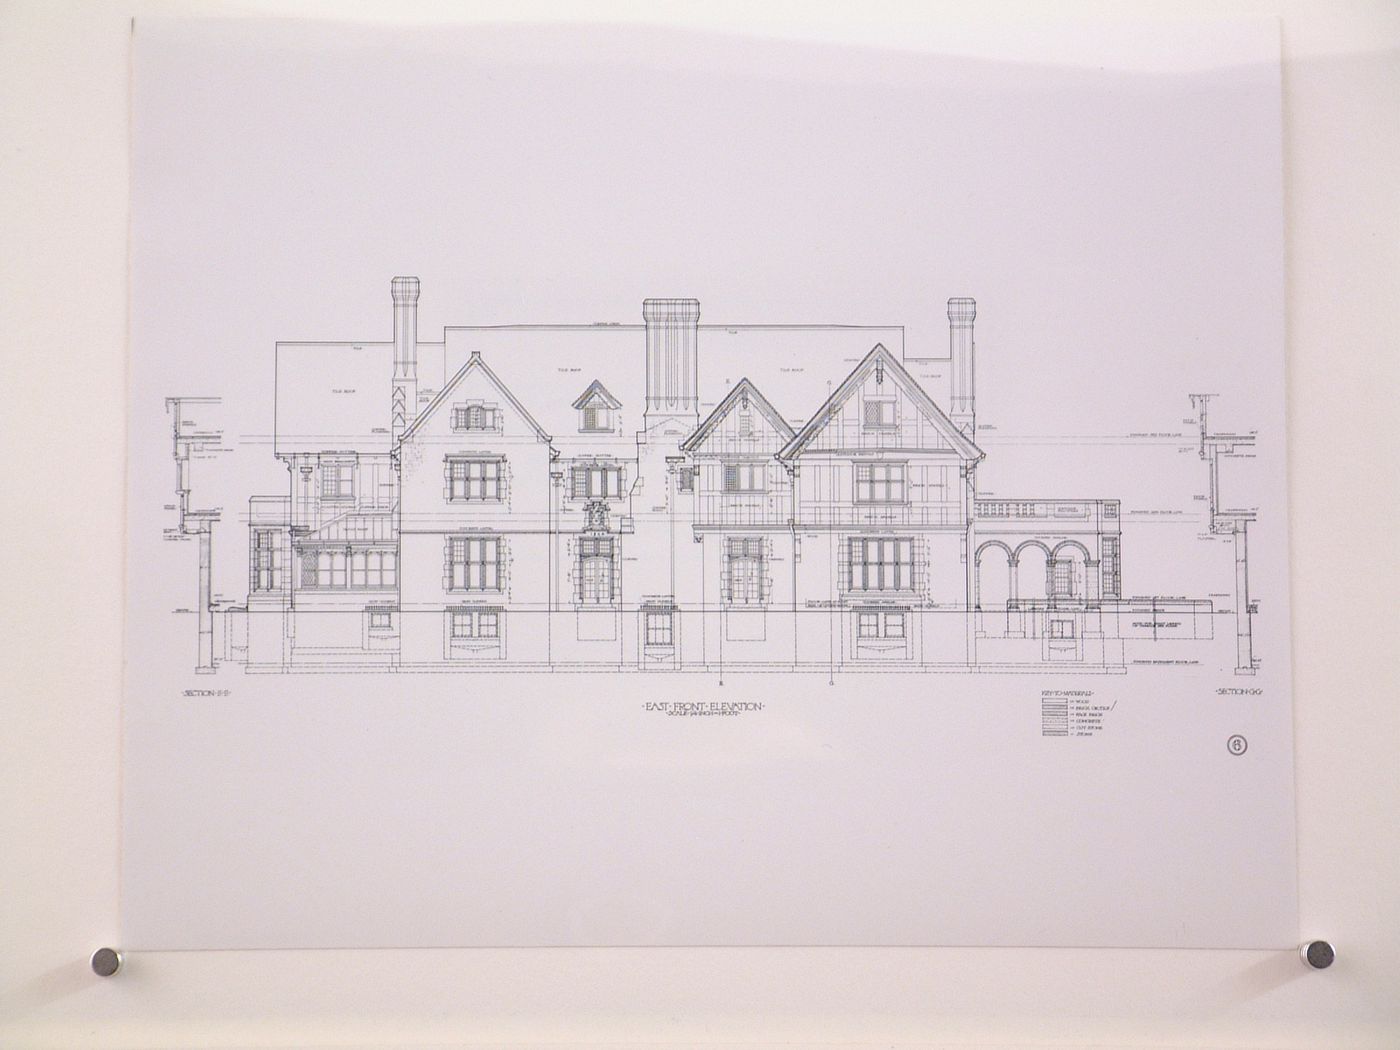 Photograph of the east front elevation for the E. Chandler Walker house (now the Art Gallery of Windsor), Walkerville, Windsor, Ontario